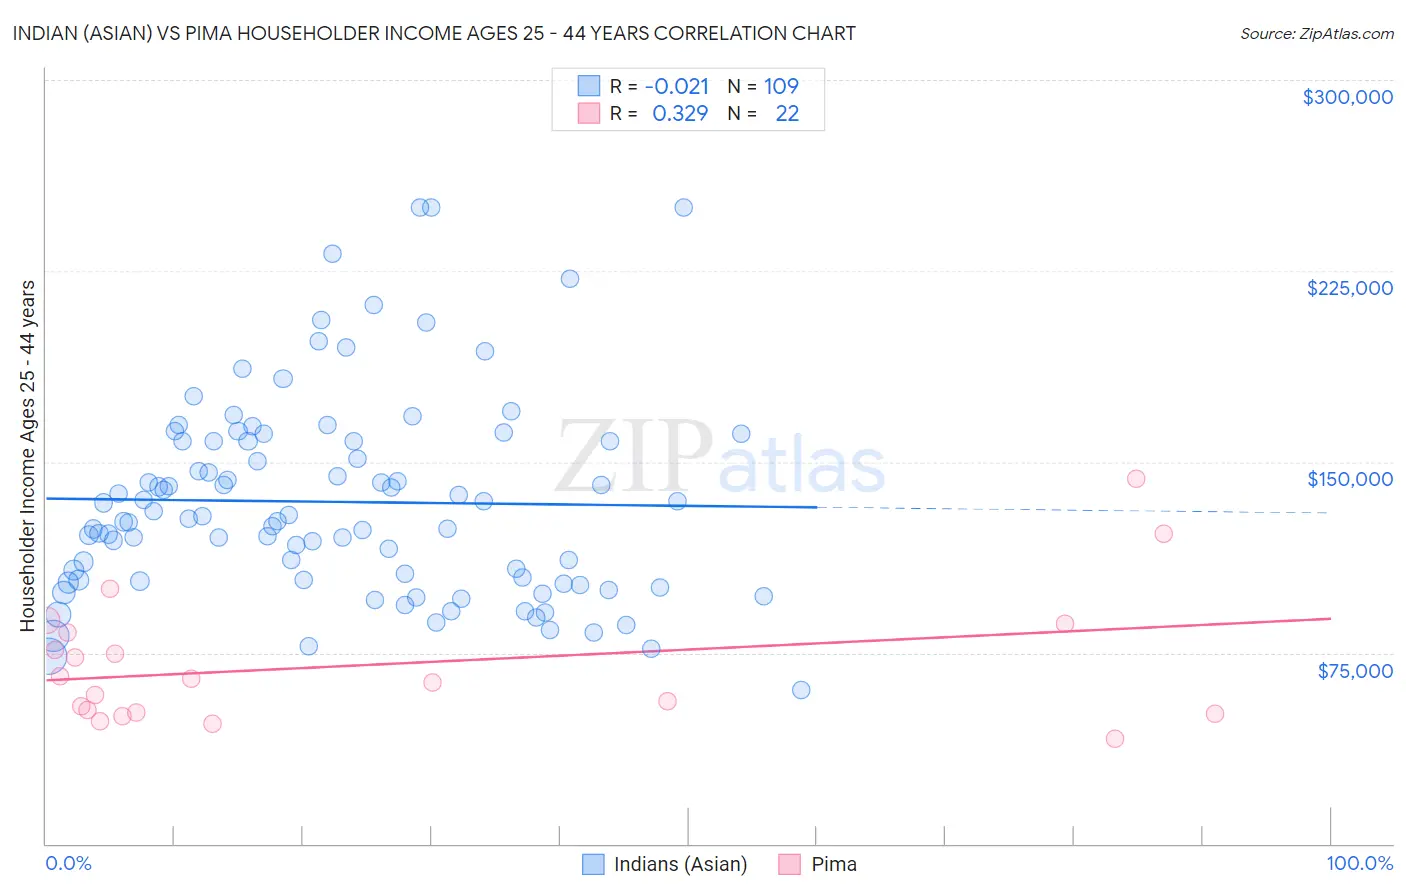 Indian (Asian) vs Pima Householder Income Ages 25 - 44 years